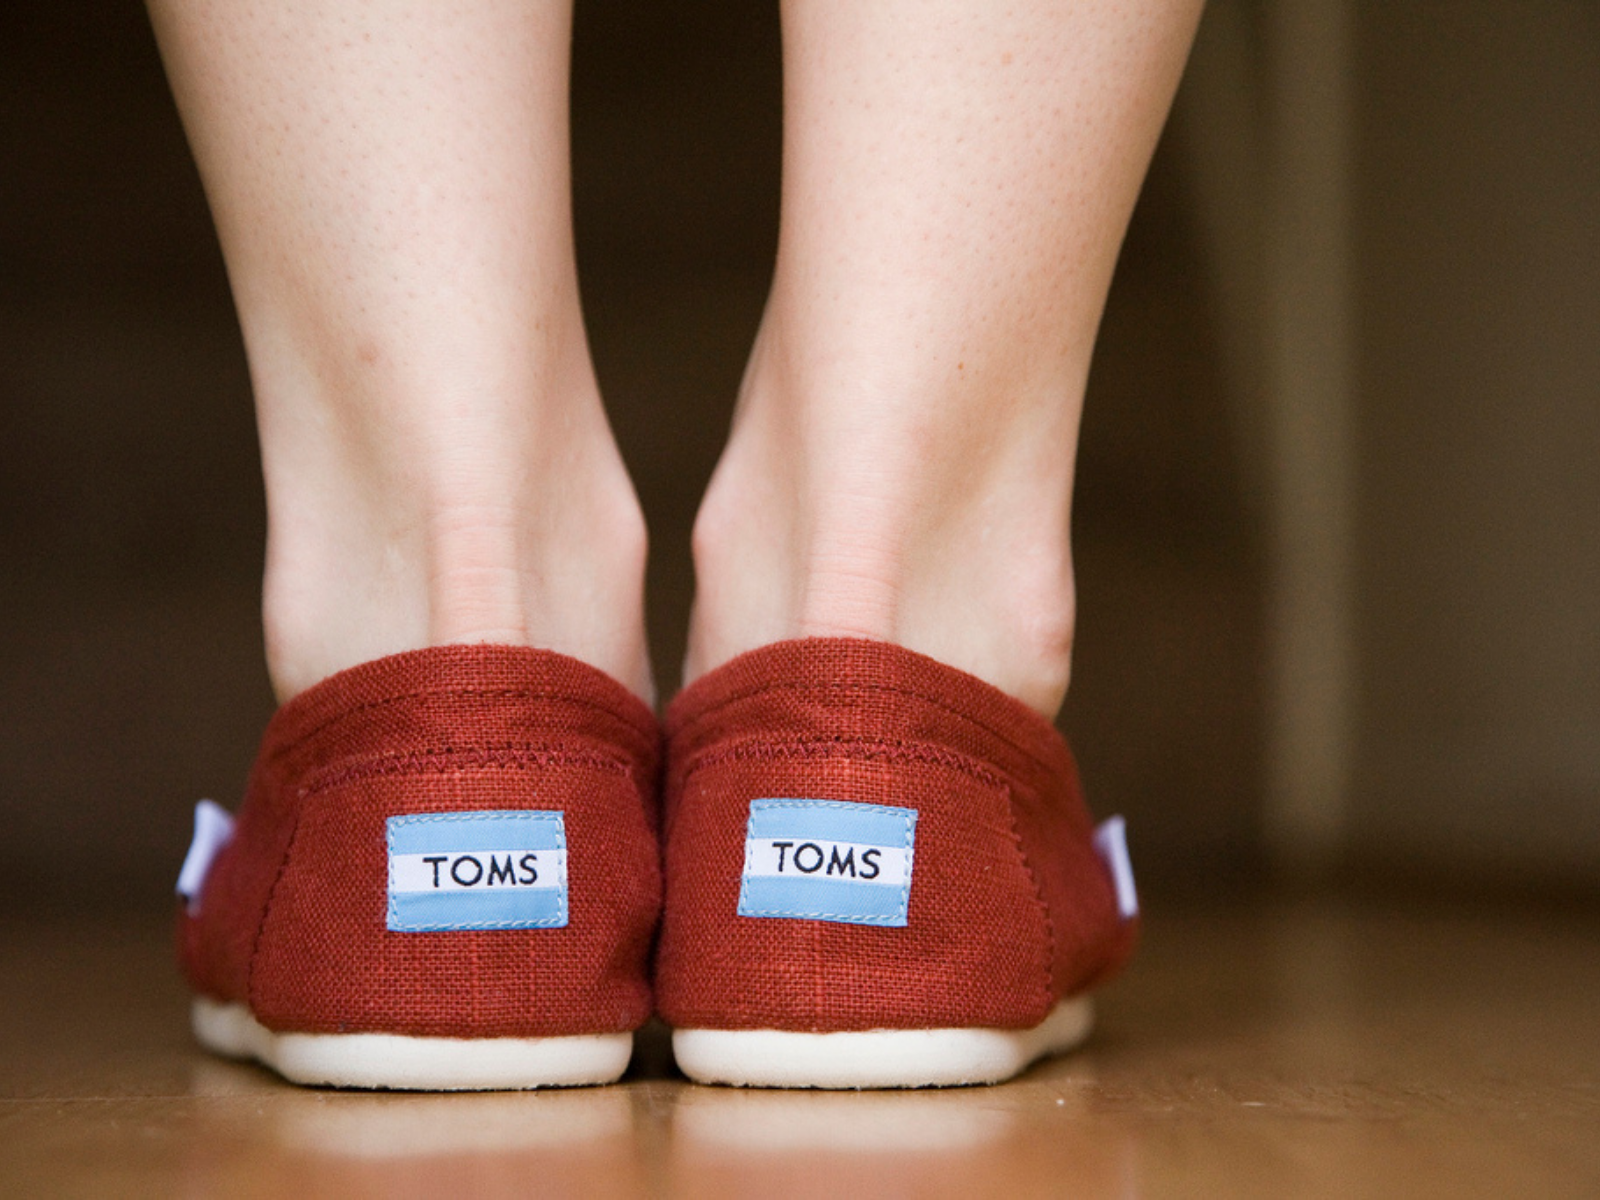 What happened to Toms shoes?